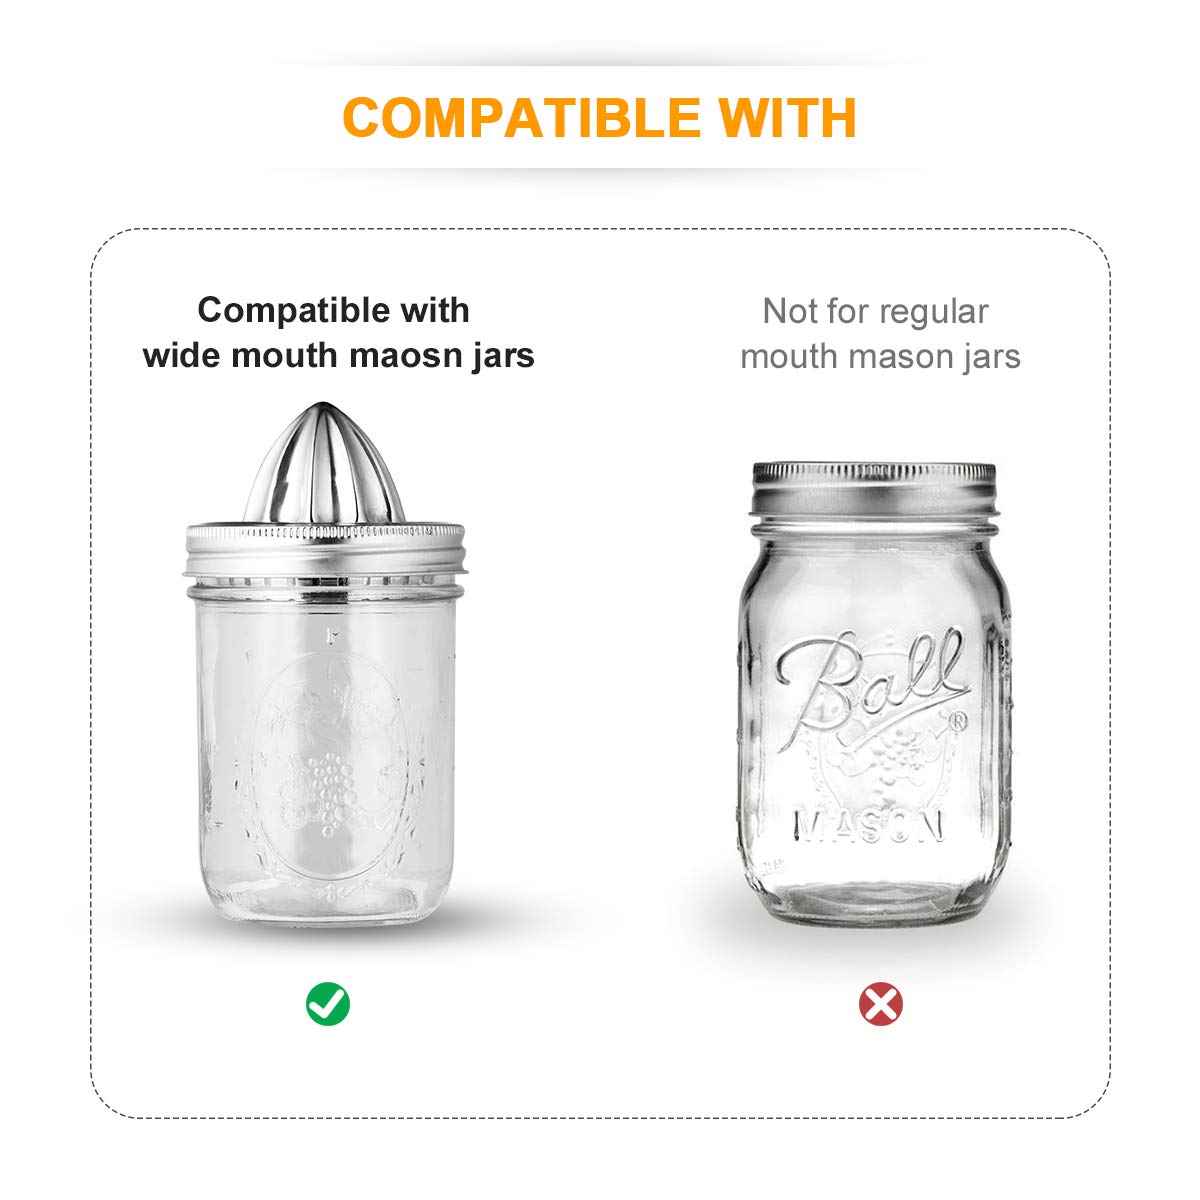 compatible with wide mouth mason jars